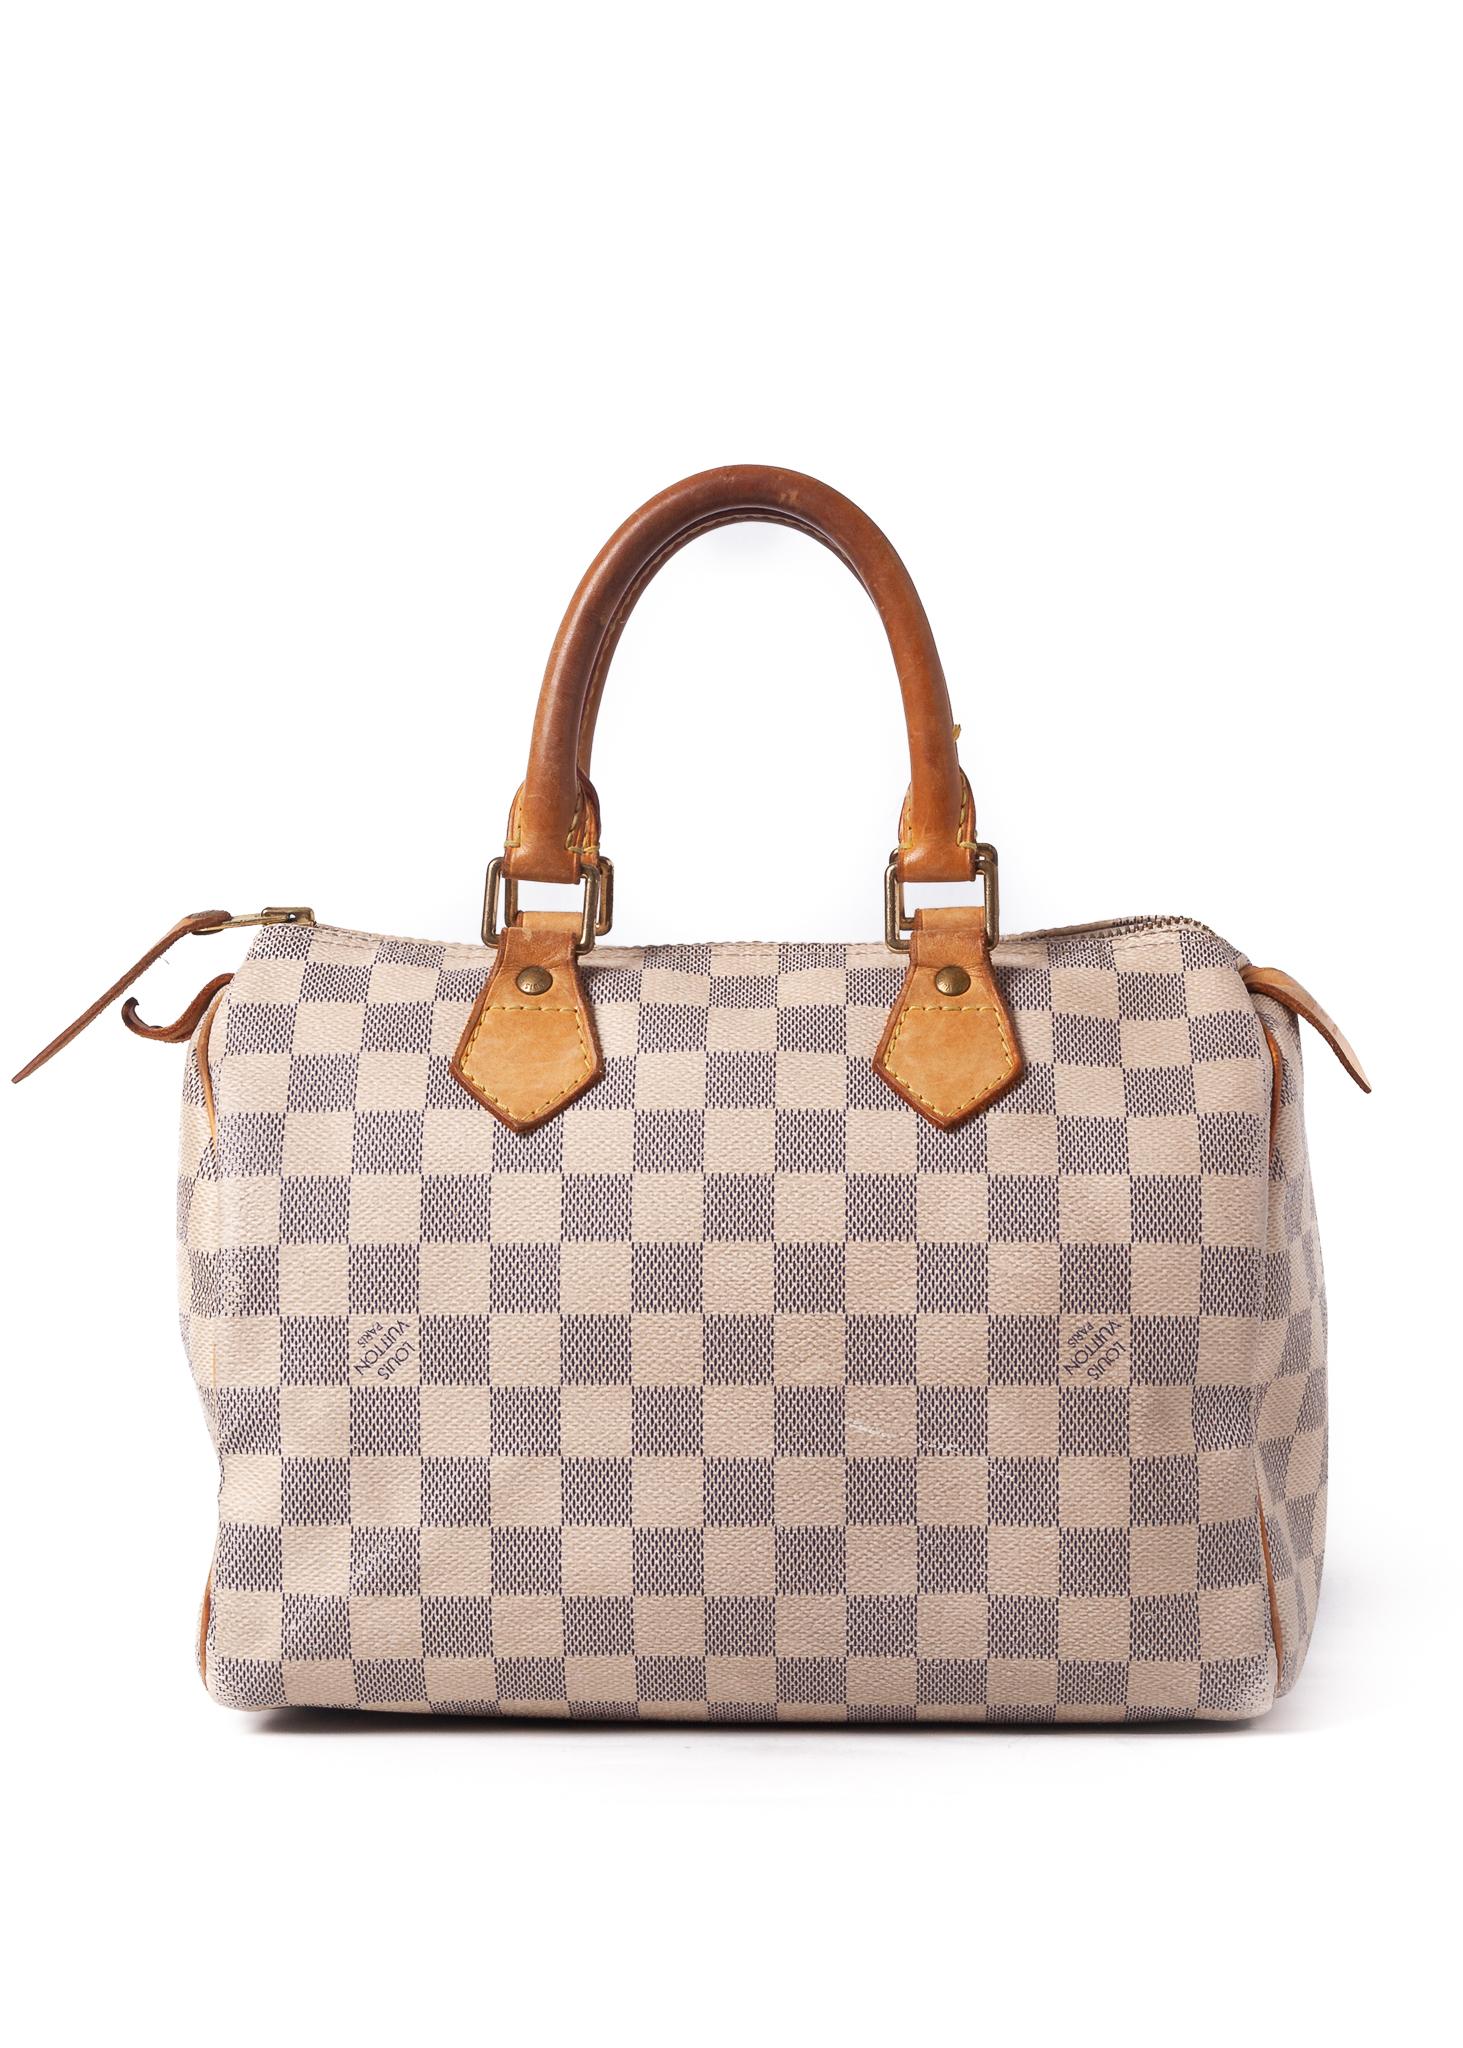 The smallest of the Speedy bags at 25cm and made popular by Audrey Hepburn. 
Made out of Damier Azur coated canvas with tanned natural cowhide leather finishes. This bag features rolled leather handles, brass hardware, top zip closure and beige